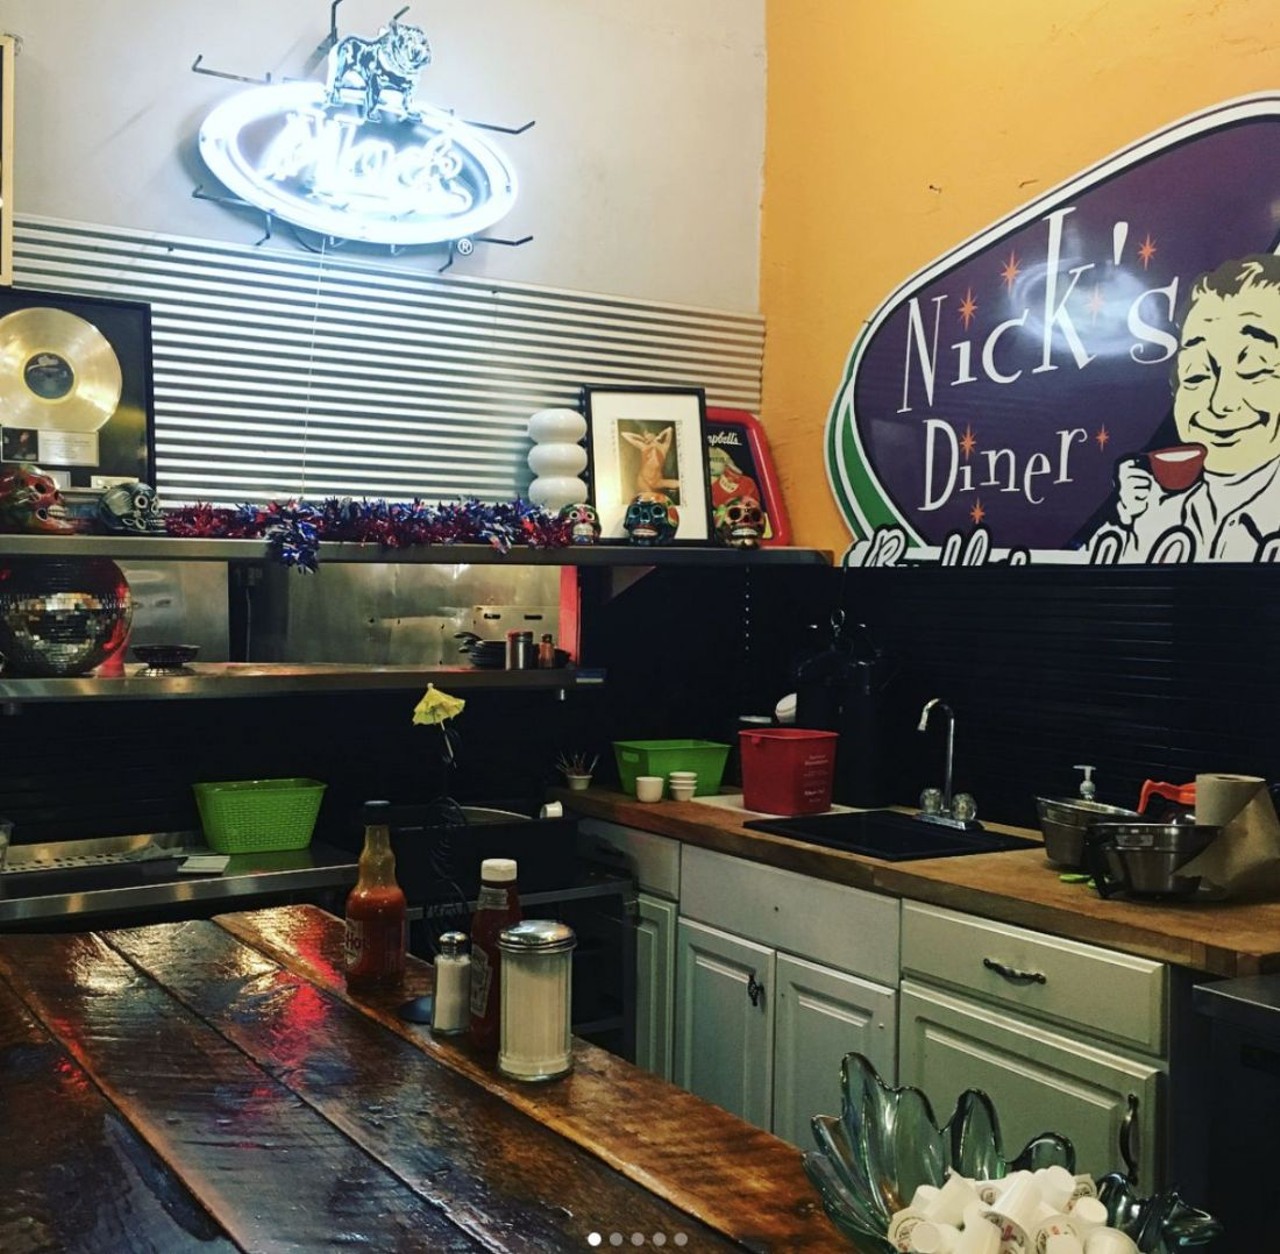  Nick&#146;s Diner
4116 Lorain Ave., Cleveland 
We love this funky Ohio City diner. The skillets are the real draw here, but don&#146;t sleep on their corned beef, which is served on rye of course.
Photo via @Icinchic/Instagram